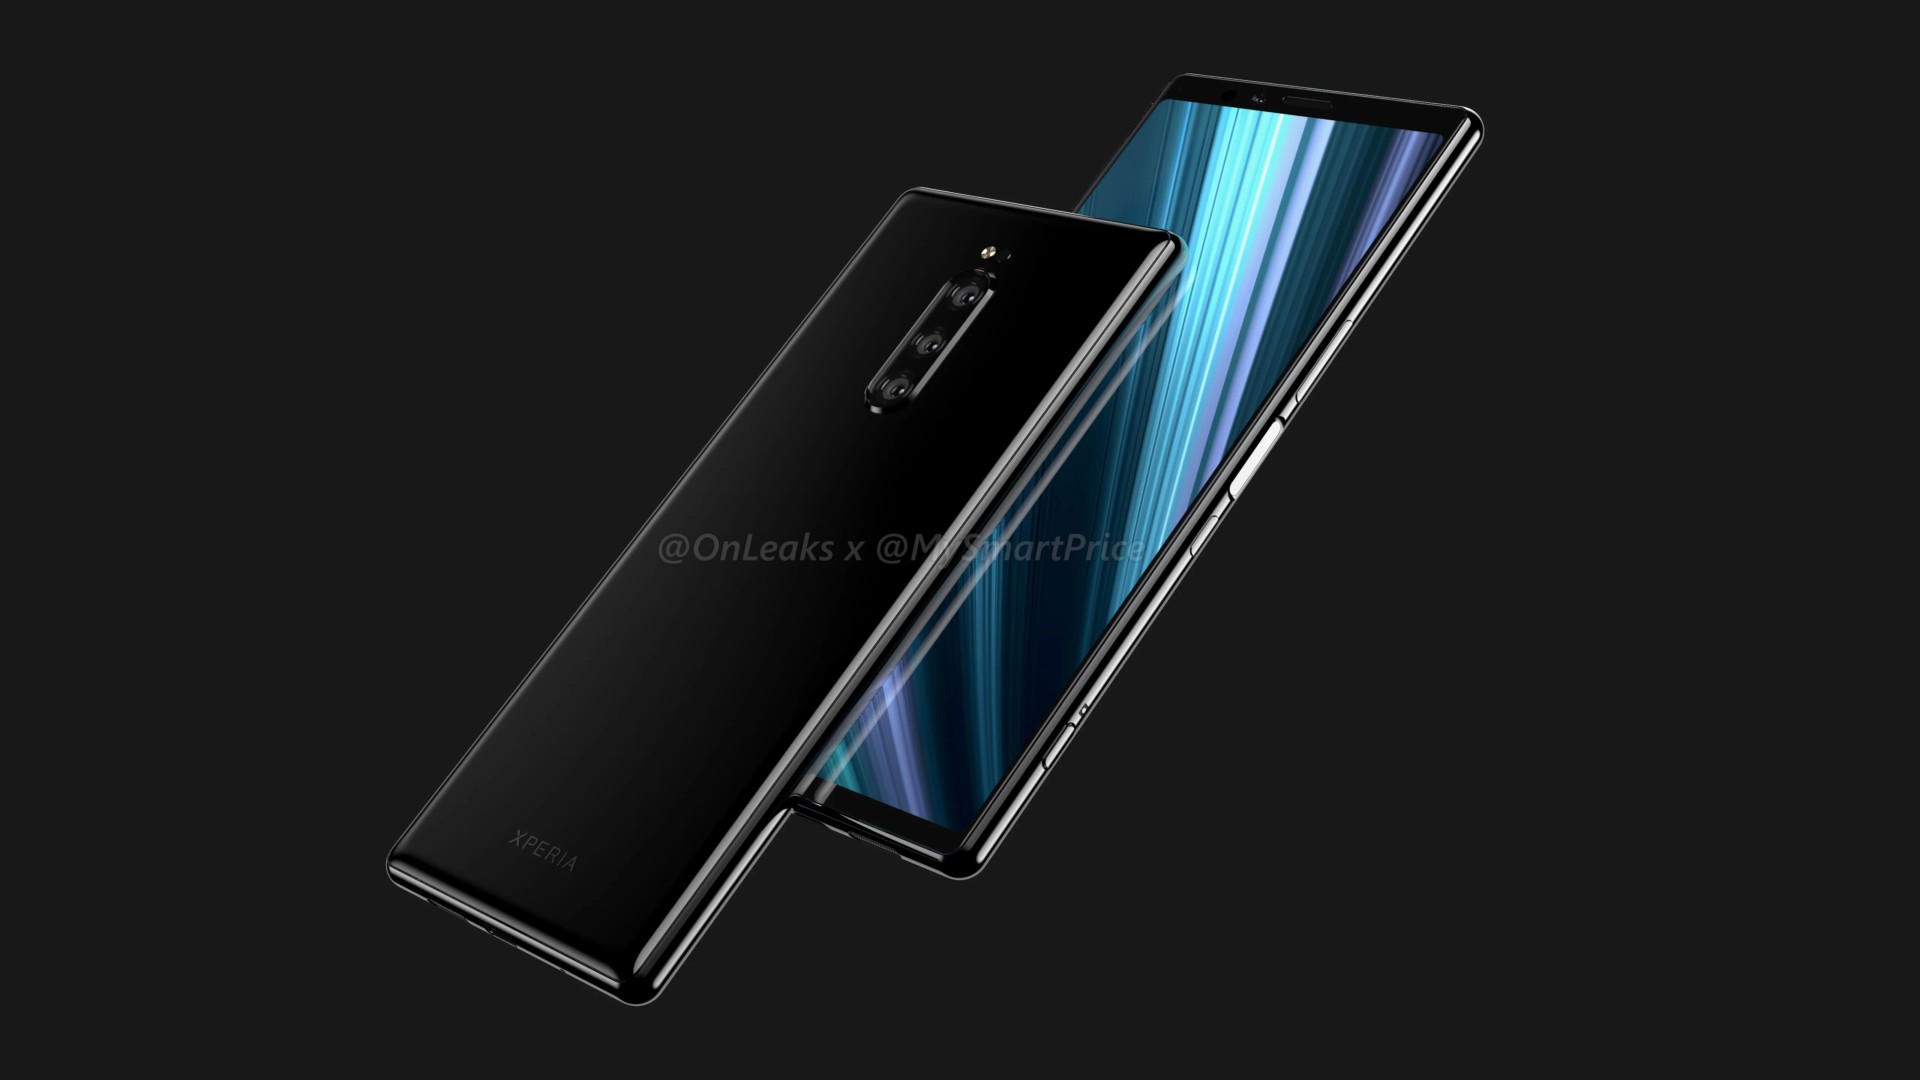 An unofficial render of the Sony Xperia XZ4.